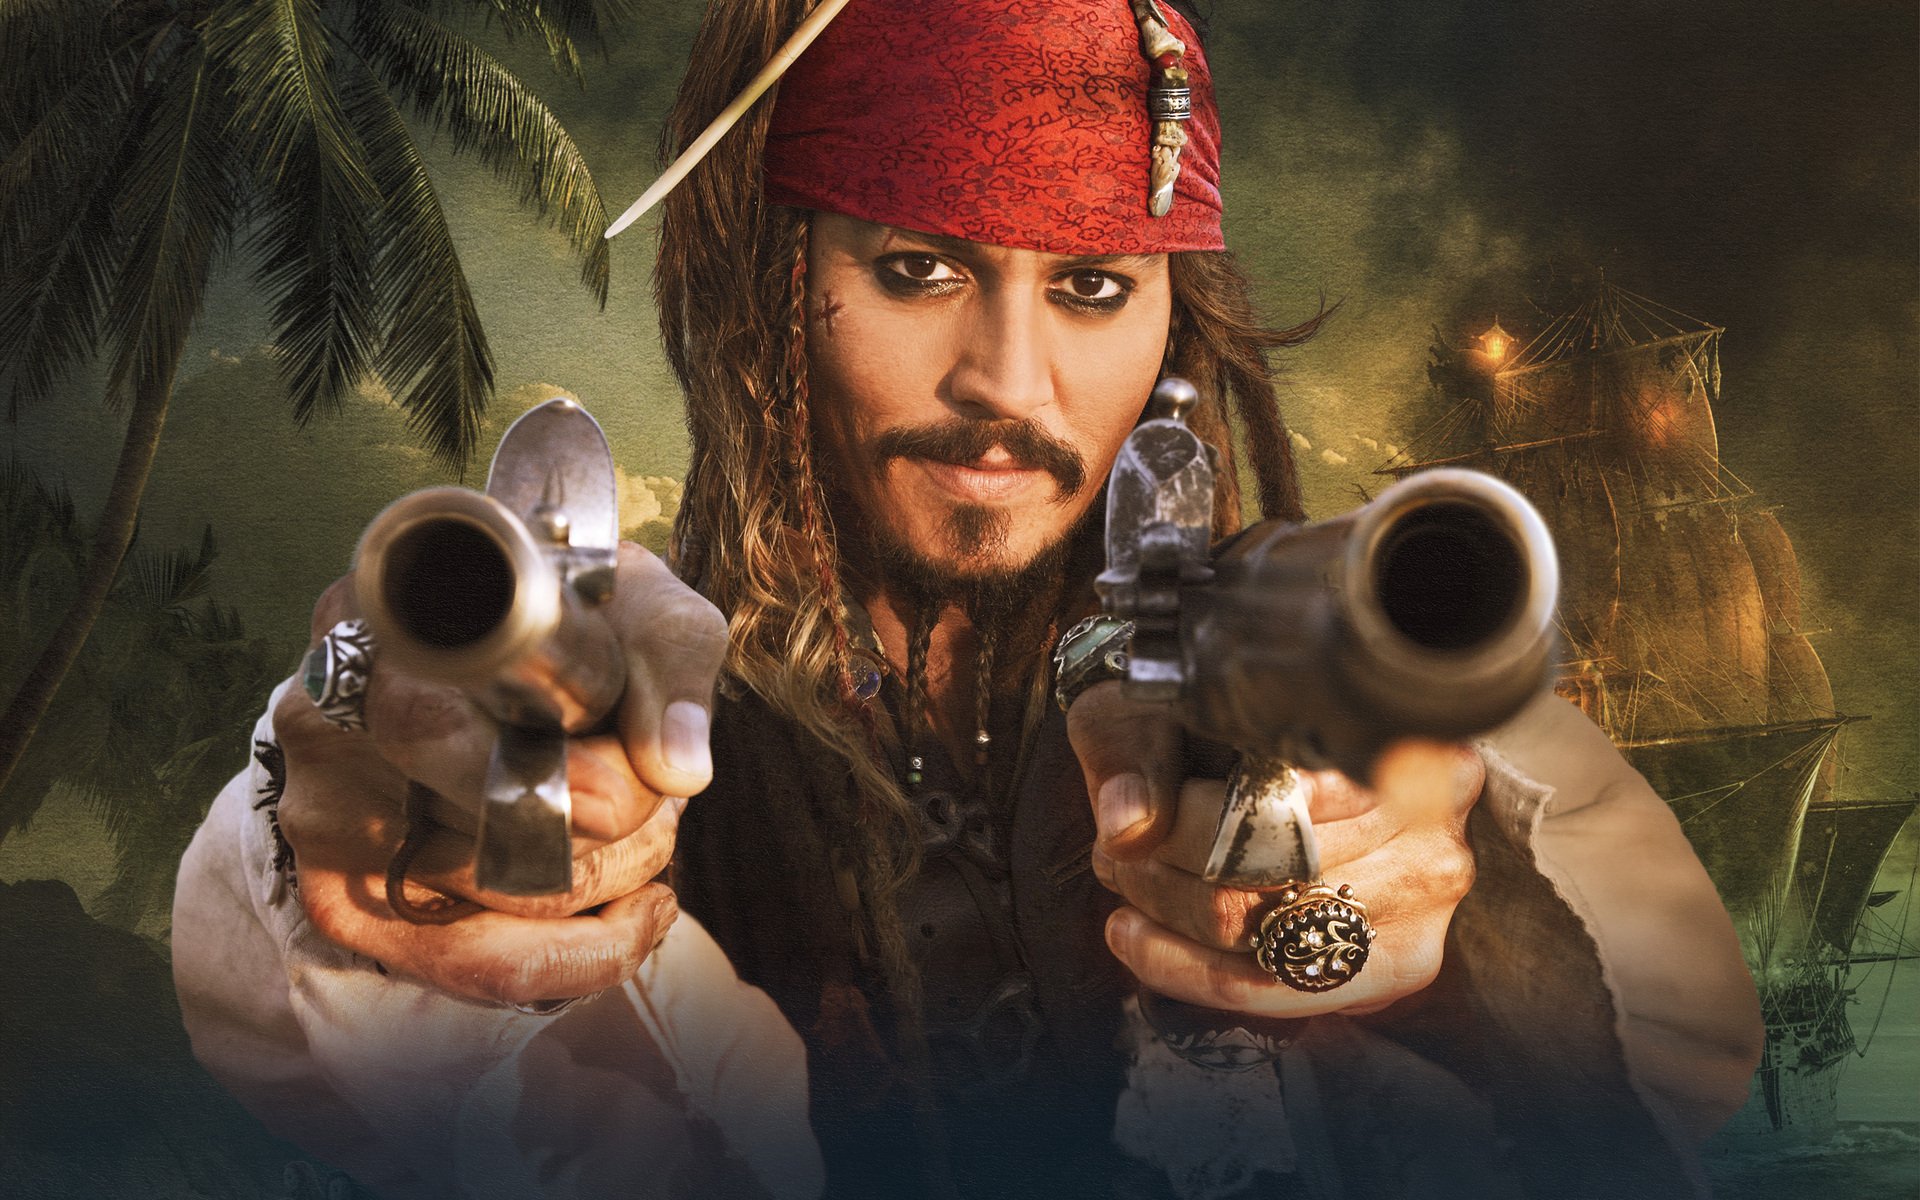 pirates of the caribbean 2 online free full movie